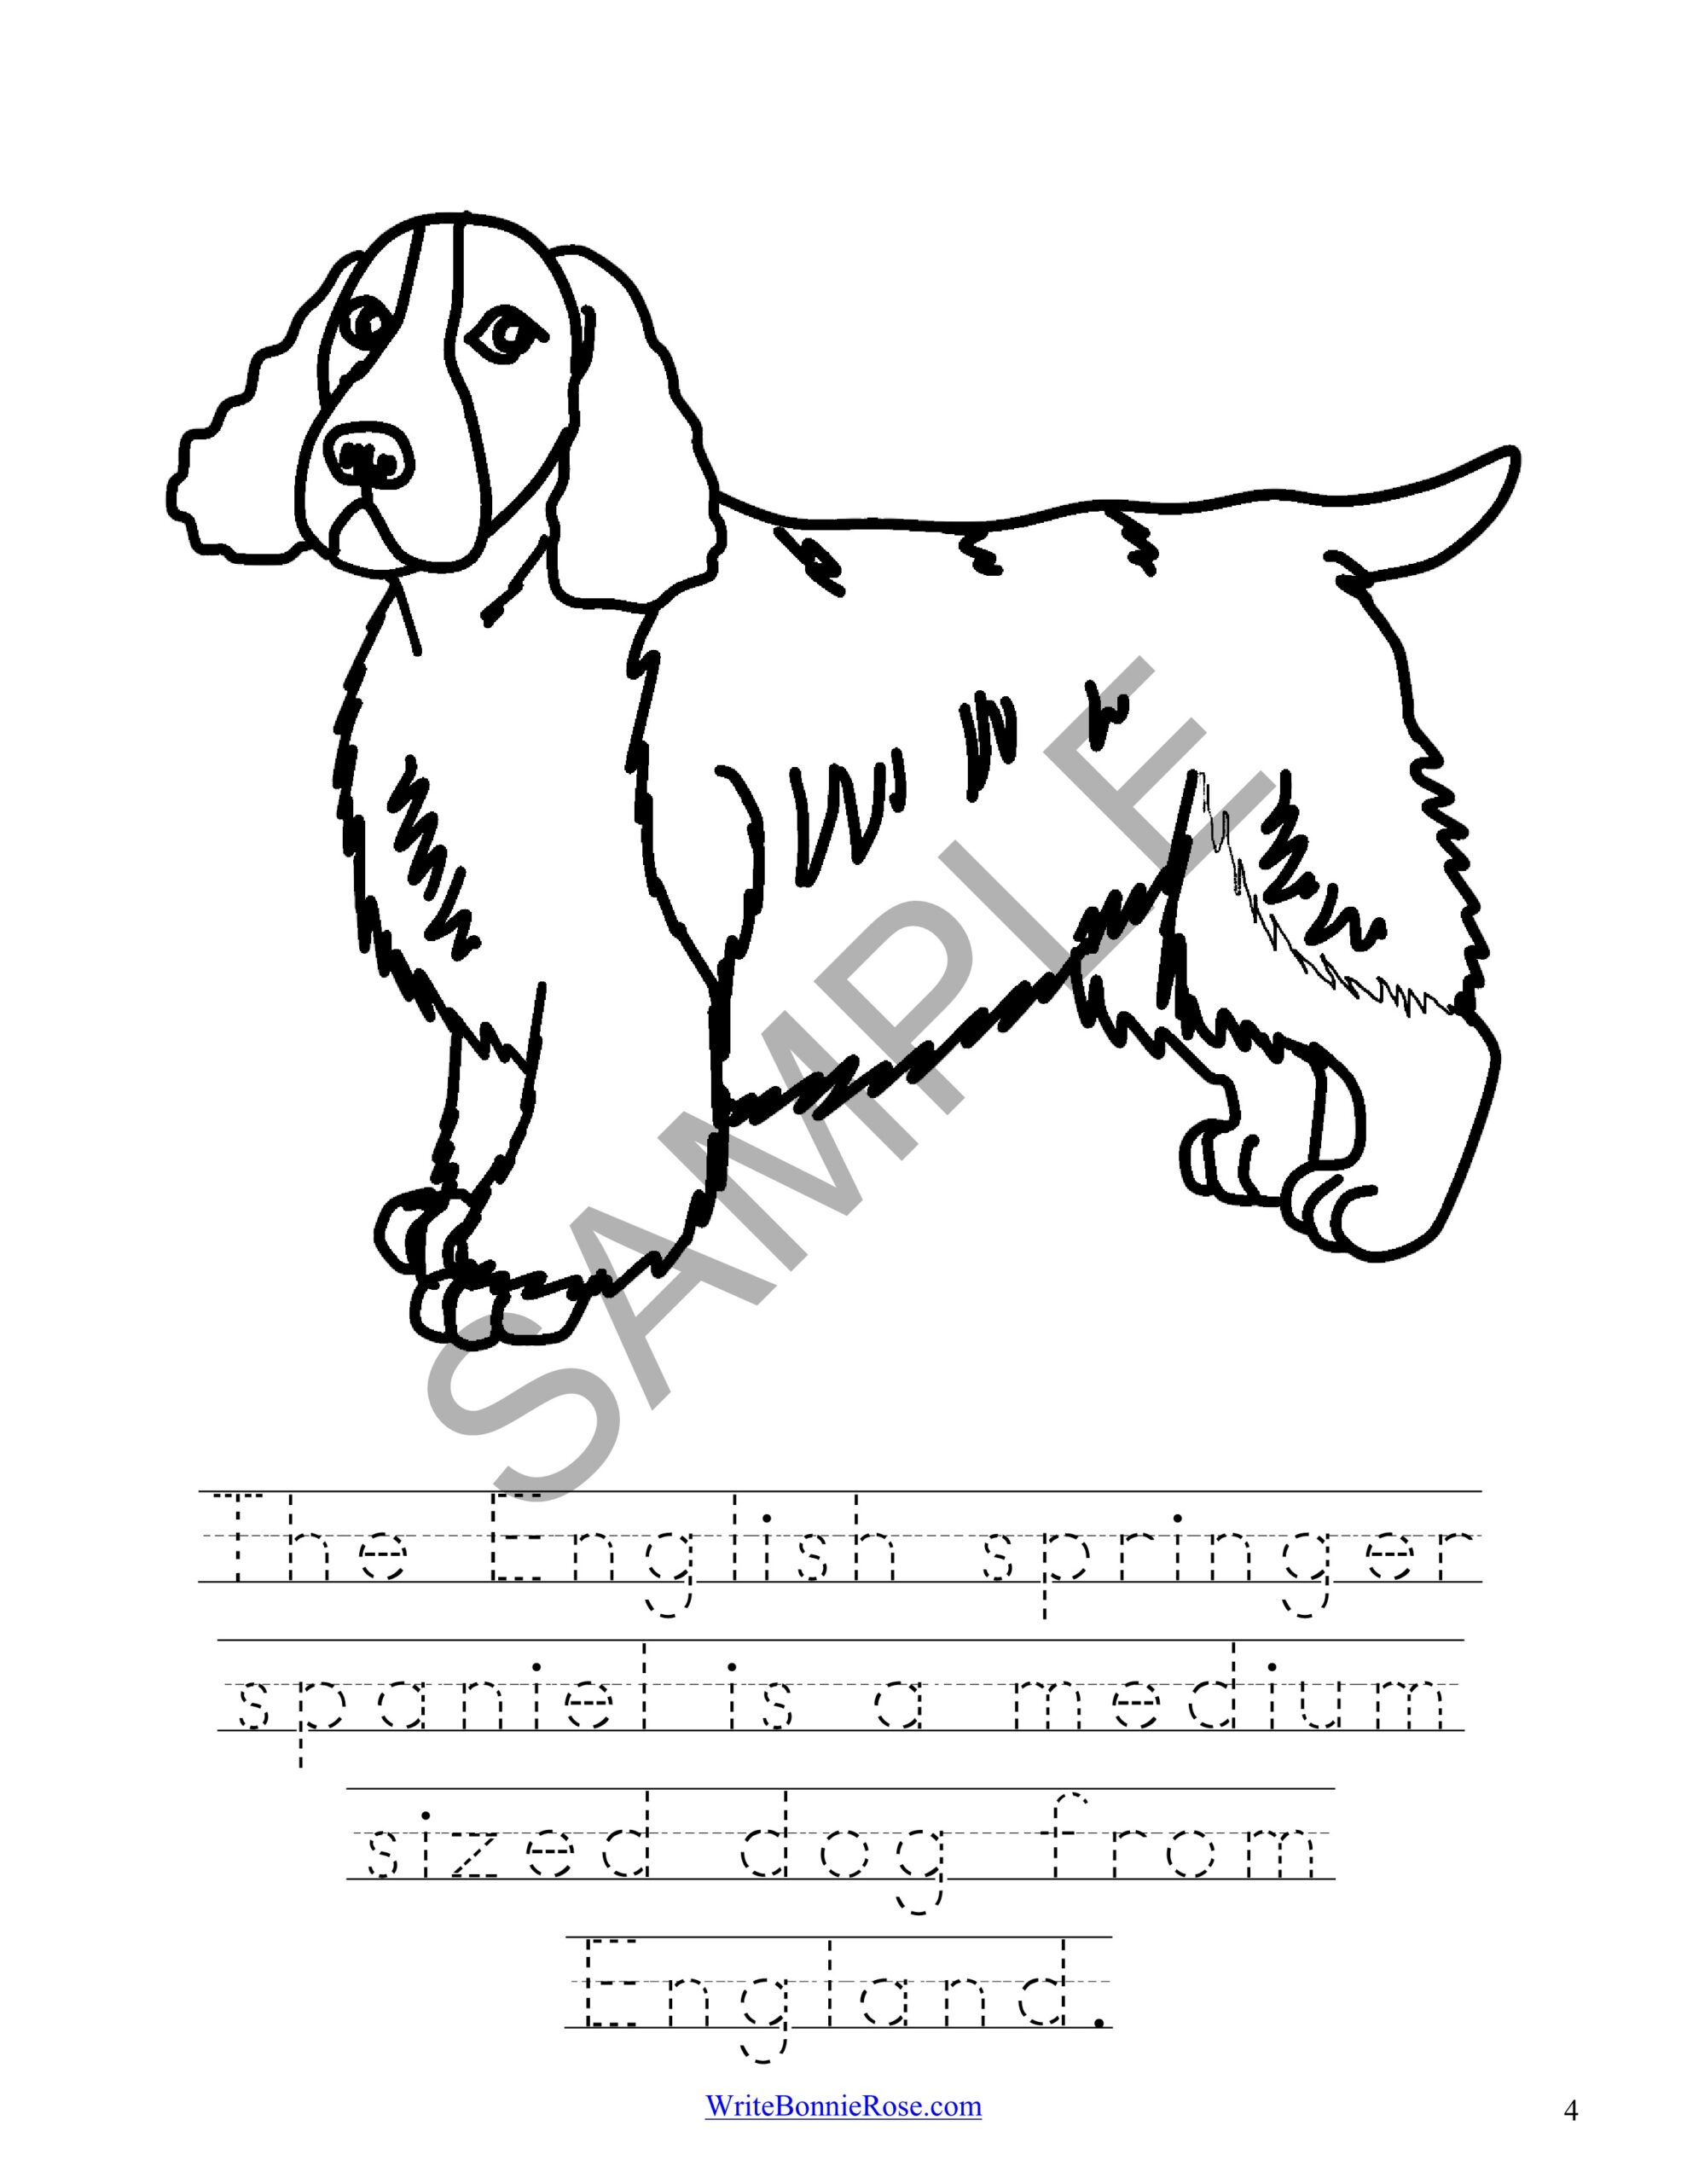 Learning about dog breeds coloring book